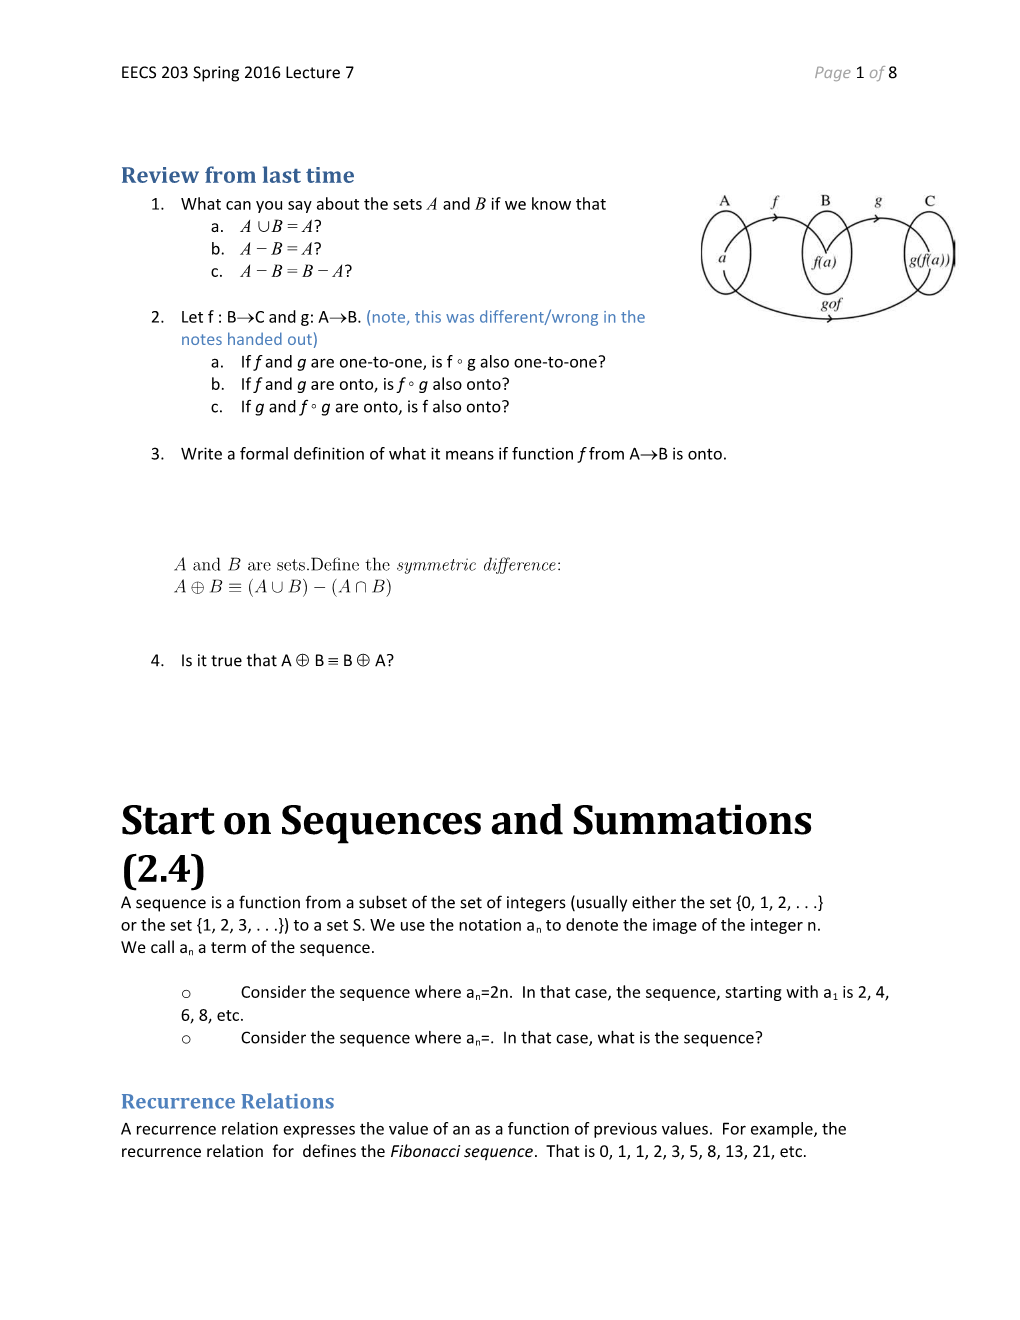 EECS 203 Spring 2016 Lecture 7 Page 8 of 8